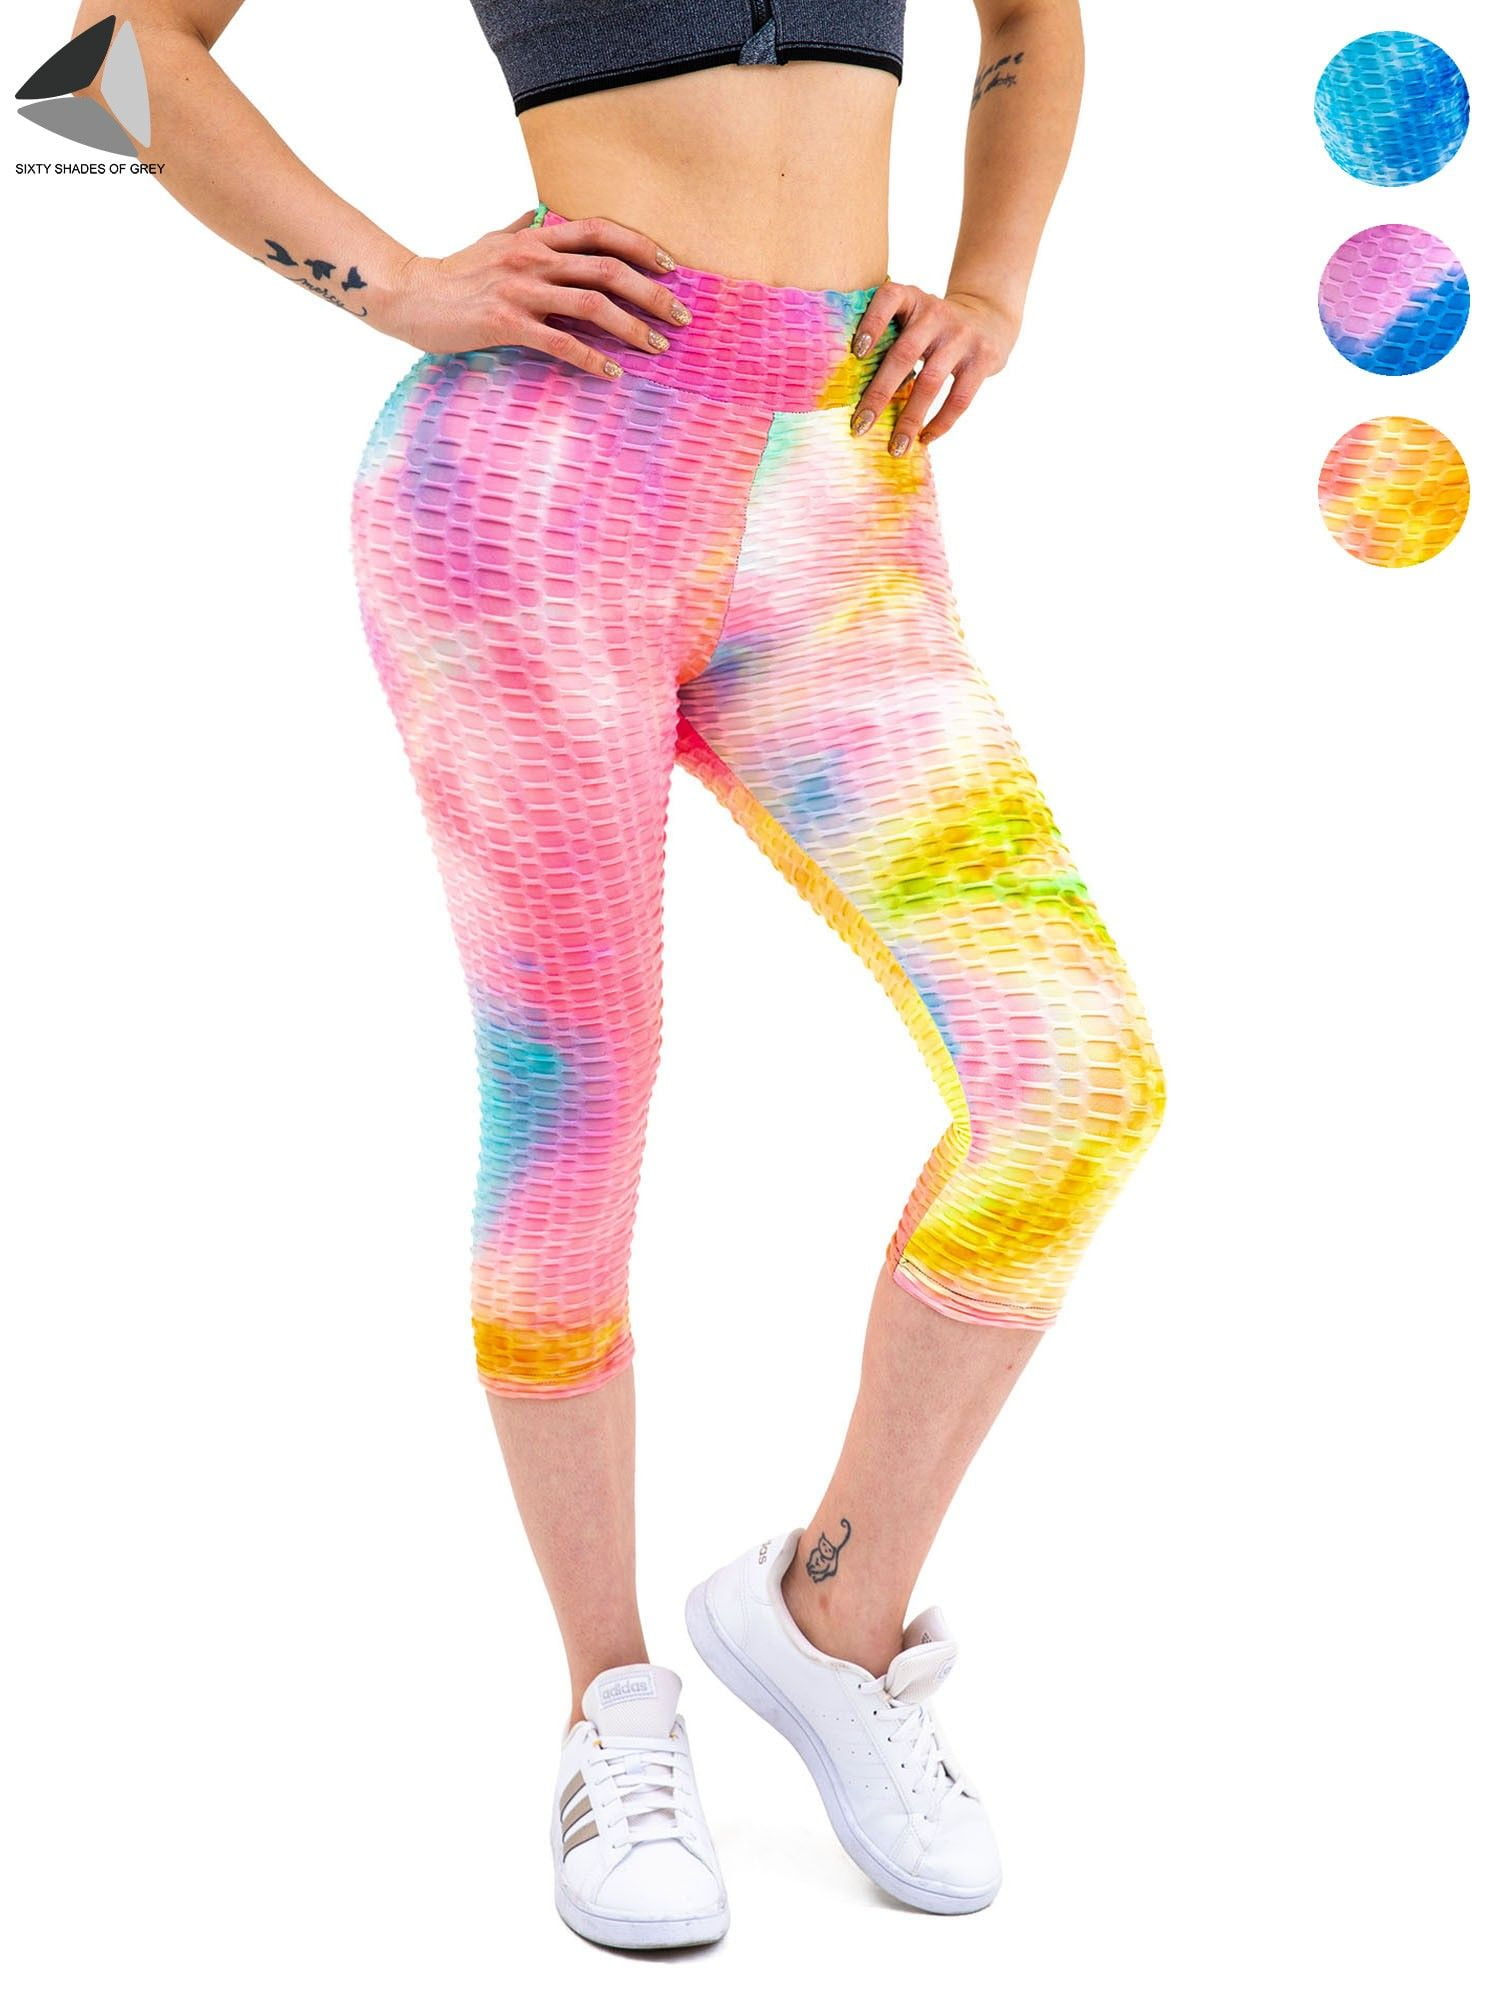 Womens Spandex Capri Leggings For Women For Yoga, Fitness, And Running  Nude, Five Point Design, Elastic Fit For Outdoor Activities And Jogging  From Mooncn, $25.15 | DHgate.Com